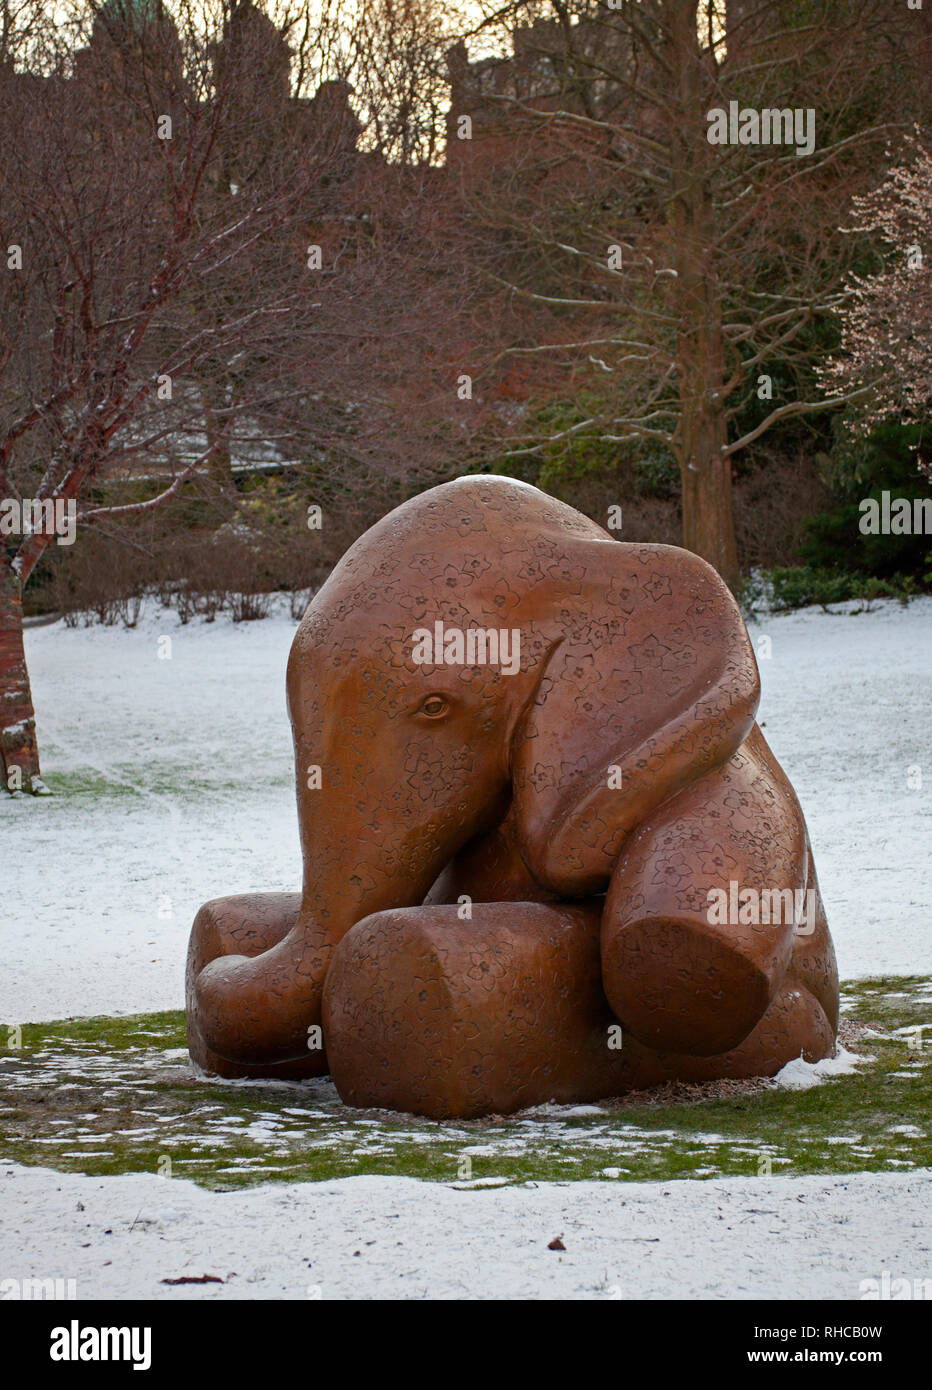 Edinburgh, Scotland, UK. 2nd Feb, 2019. A Memorial in the shape of a two and a half tonne baby elephant was unveiled in Edinburgh's Princes Street Gardens West, this comes more than six years after it was discovered that babies ashes had been dumped in an unmarked grave at Mortonhall Cemetery, the memorial is a way to remember the hundreds of babies in future years. Designed and created by Sculptor Andy Scott. Mr Scott gave the baby elephant the working title “Lulla-Bye” Stock Photo